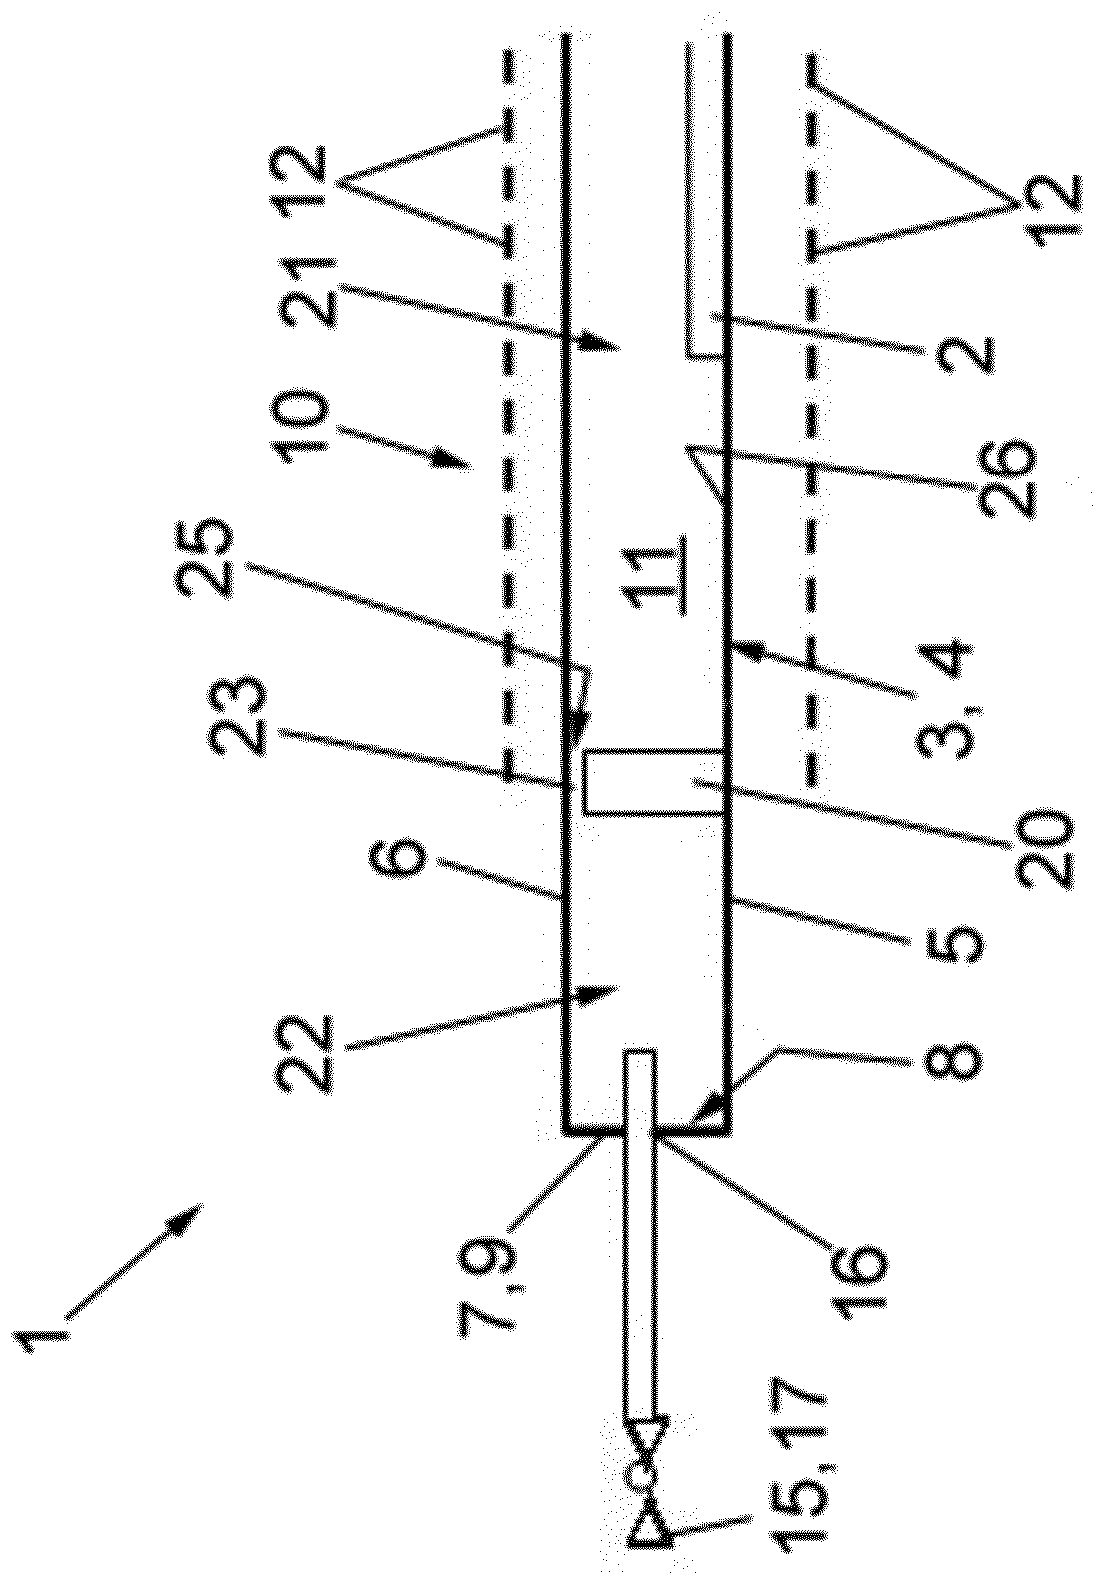 Apparatus and methods for processing substrates